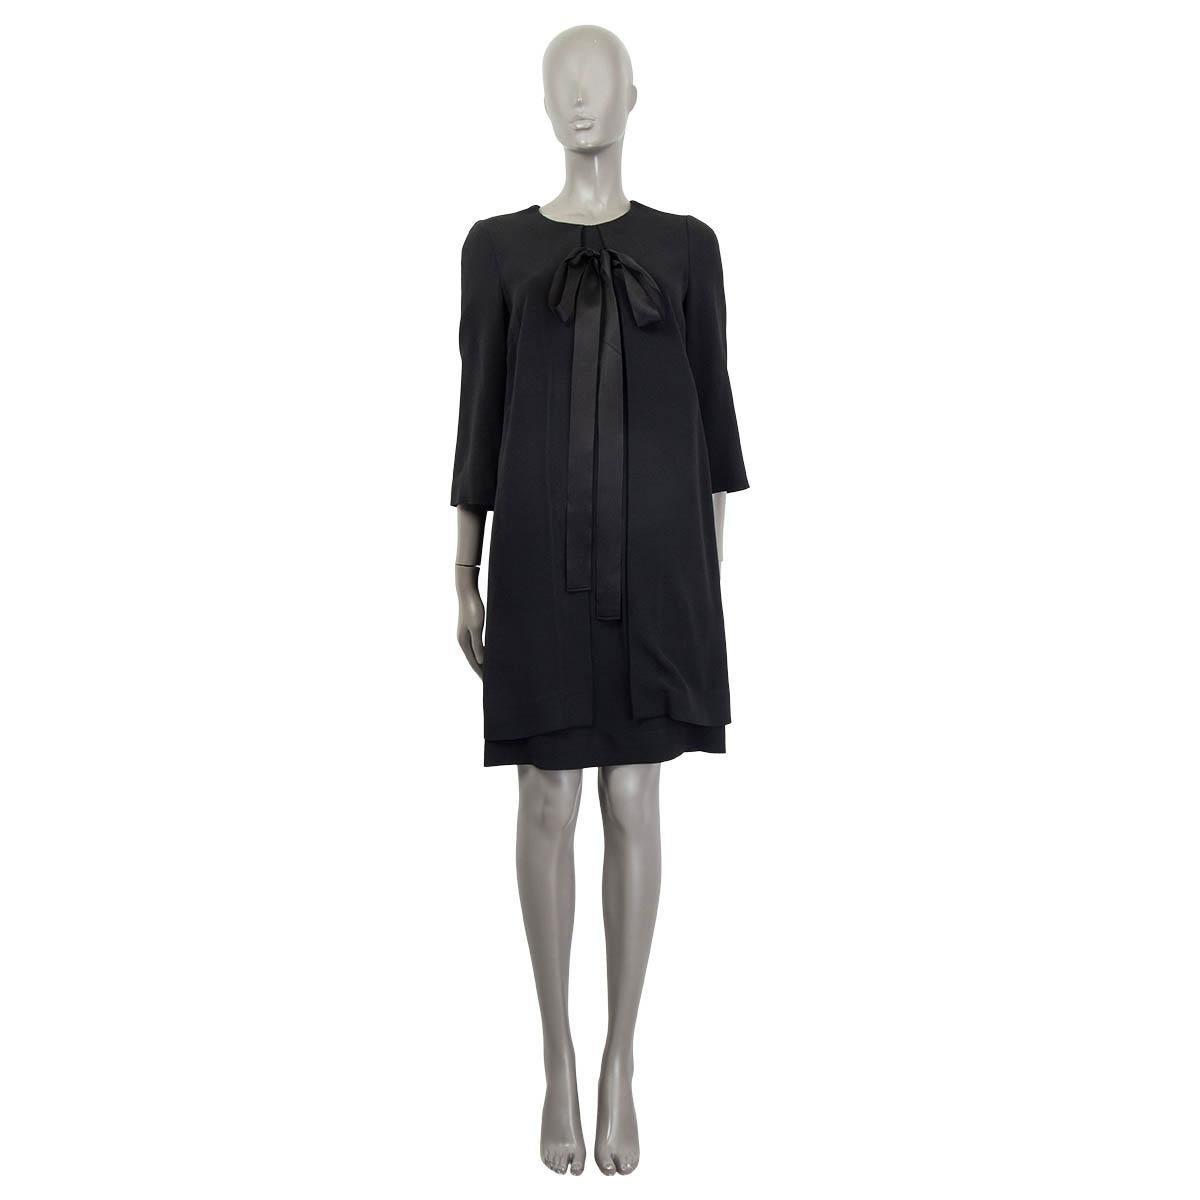 100% authentic Dolce & Gabbana panelled dress in black viscose (46%), acetate (41%), silk (10%) and elastane (3%). Features 3/4 sleeves and a bow at the neck. Opens with a concealed zipper and a hook at the back. Lined in black and white polyester